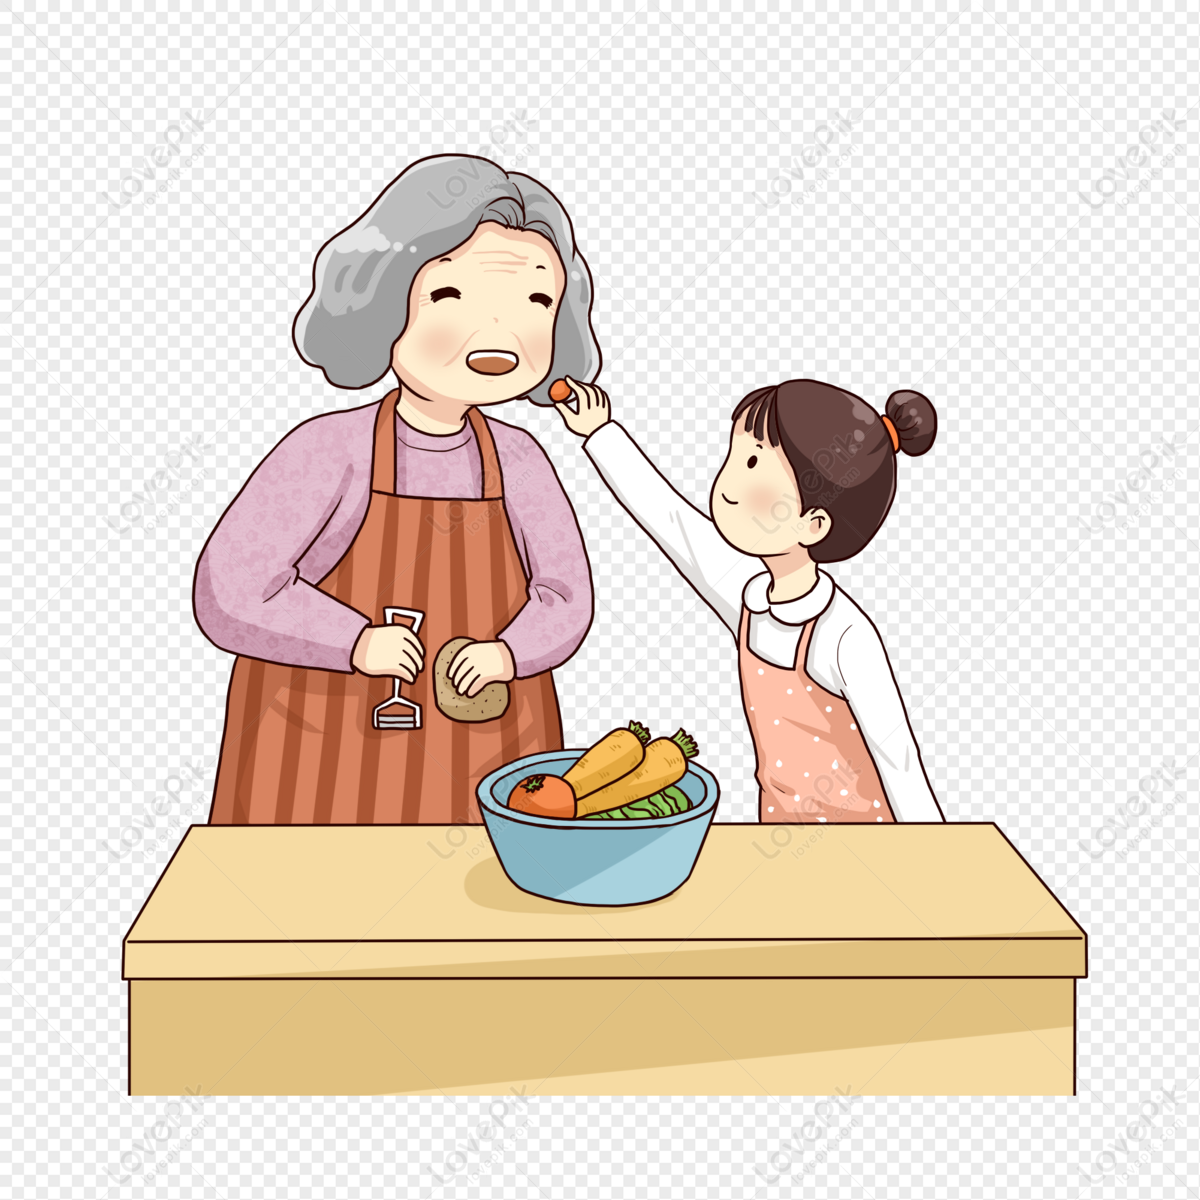 And Grandma In The Kitchen PNG Transparent And Clipart Image For Free  Download - Lovepik | 401624036